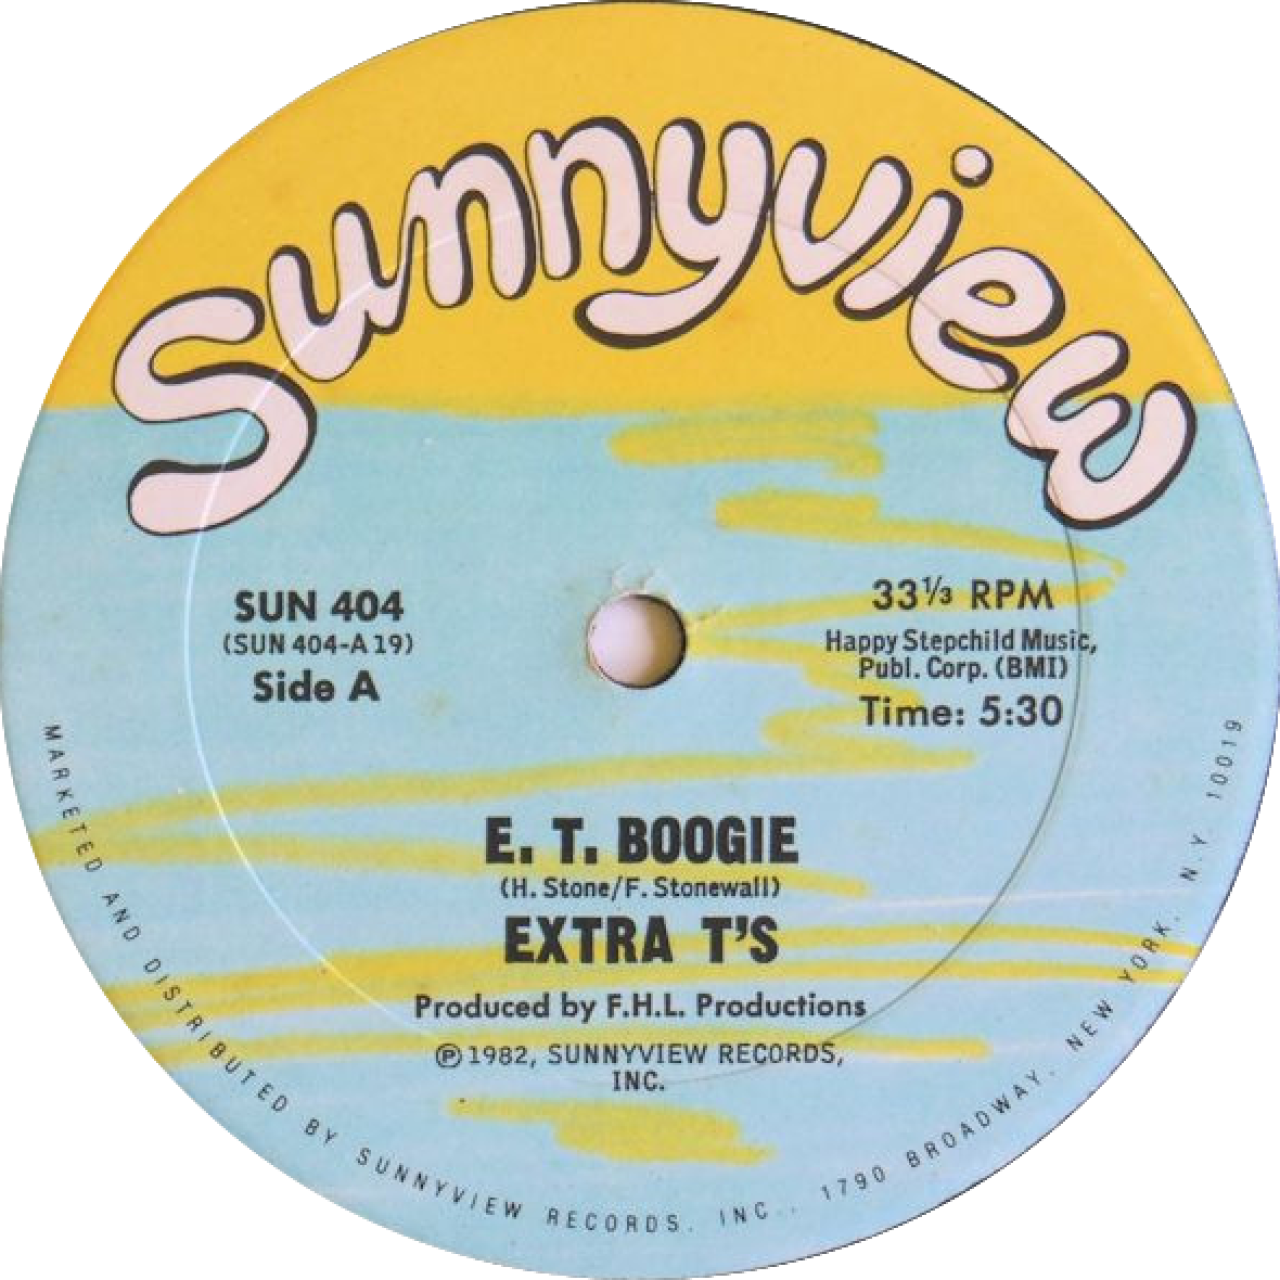 Extra T's - E.T. Boogie